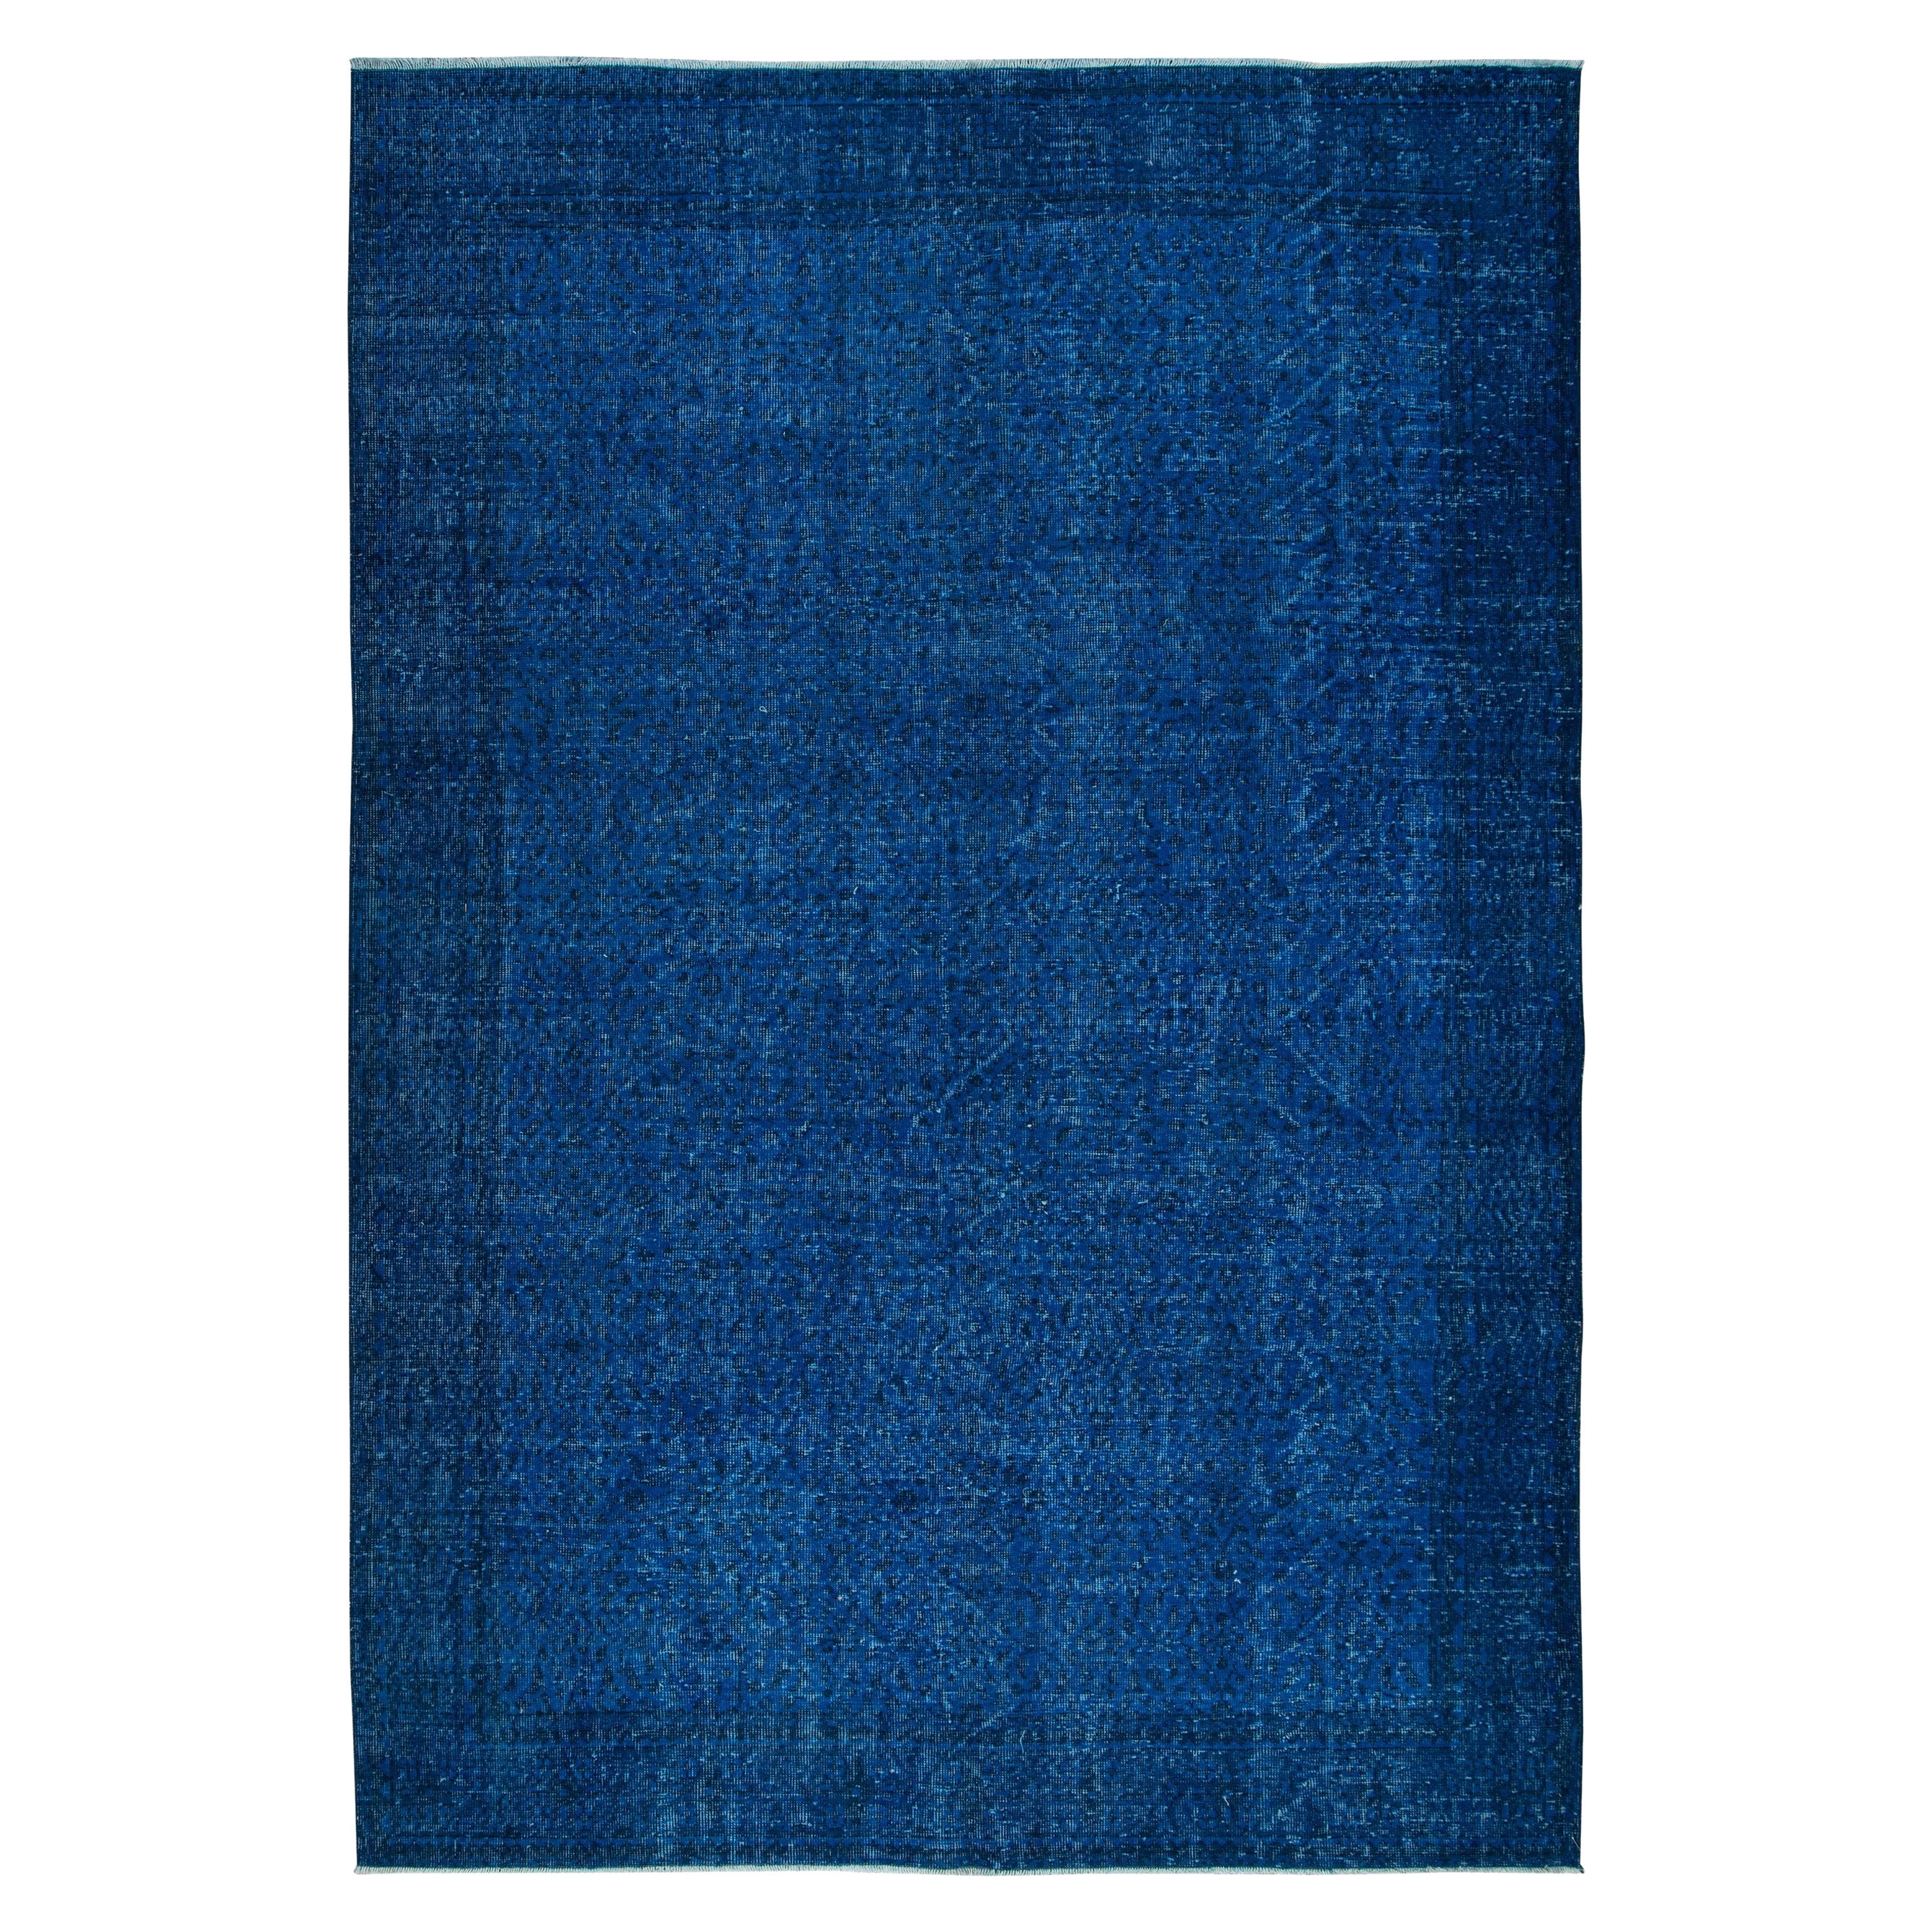 7x10 Ft Modern Blue Area Rug made of wool and cotton, Hand-Knotted in Turkey For Sale